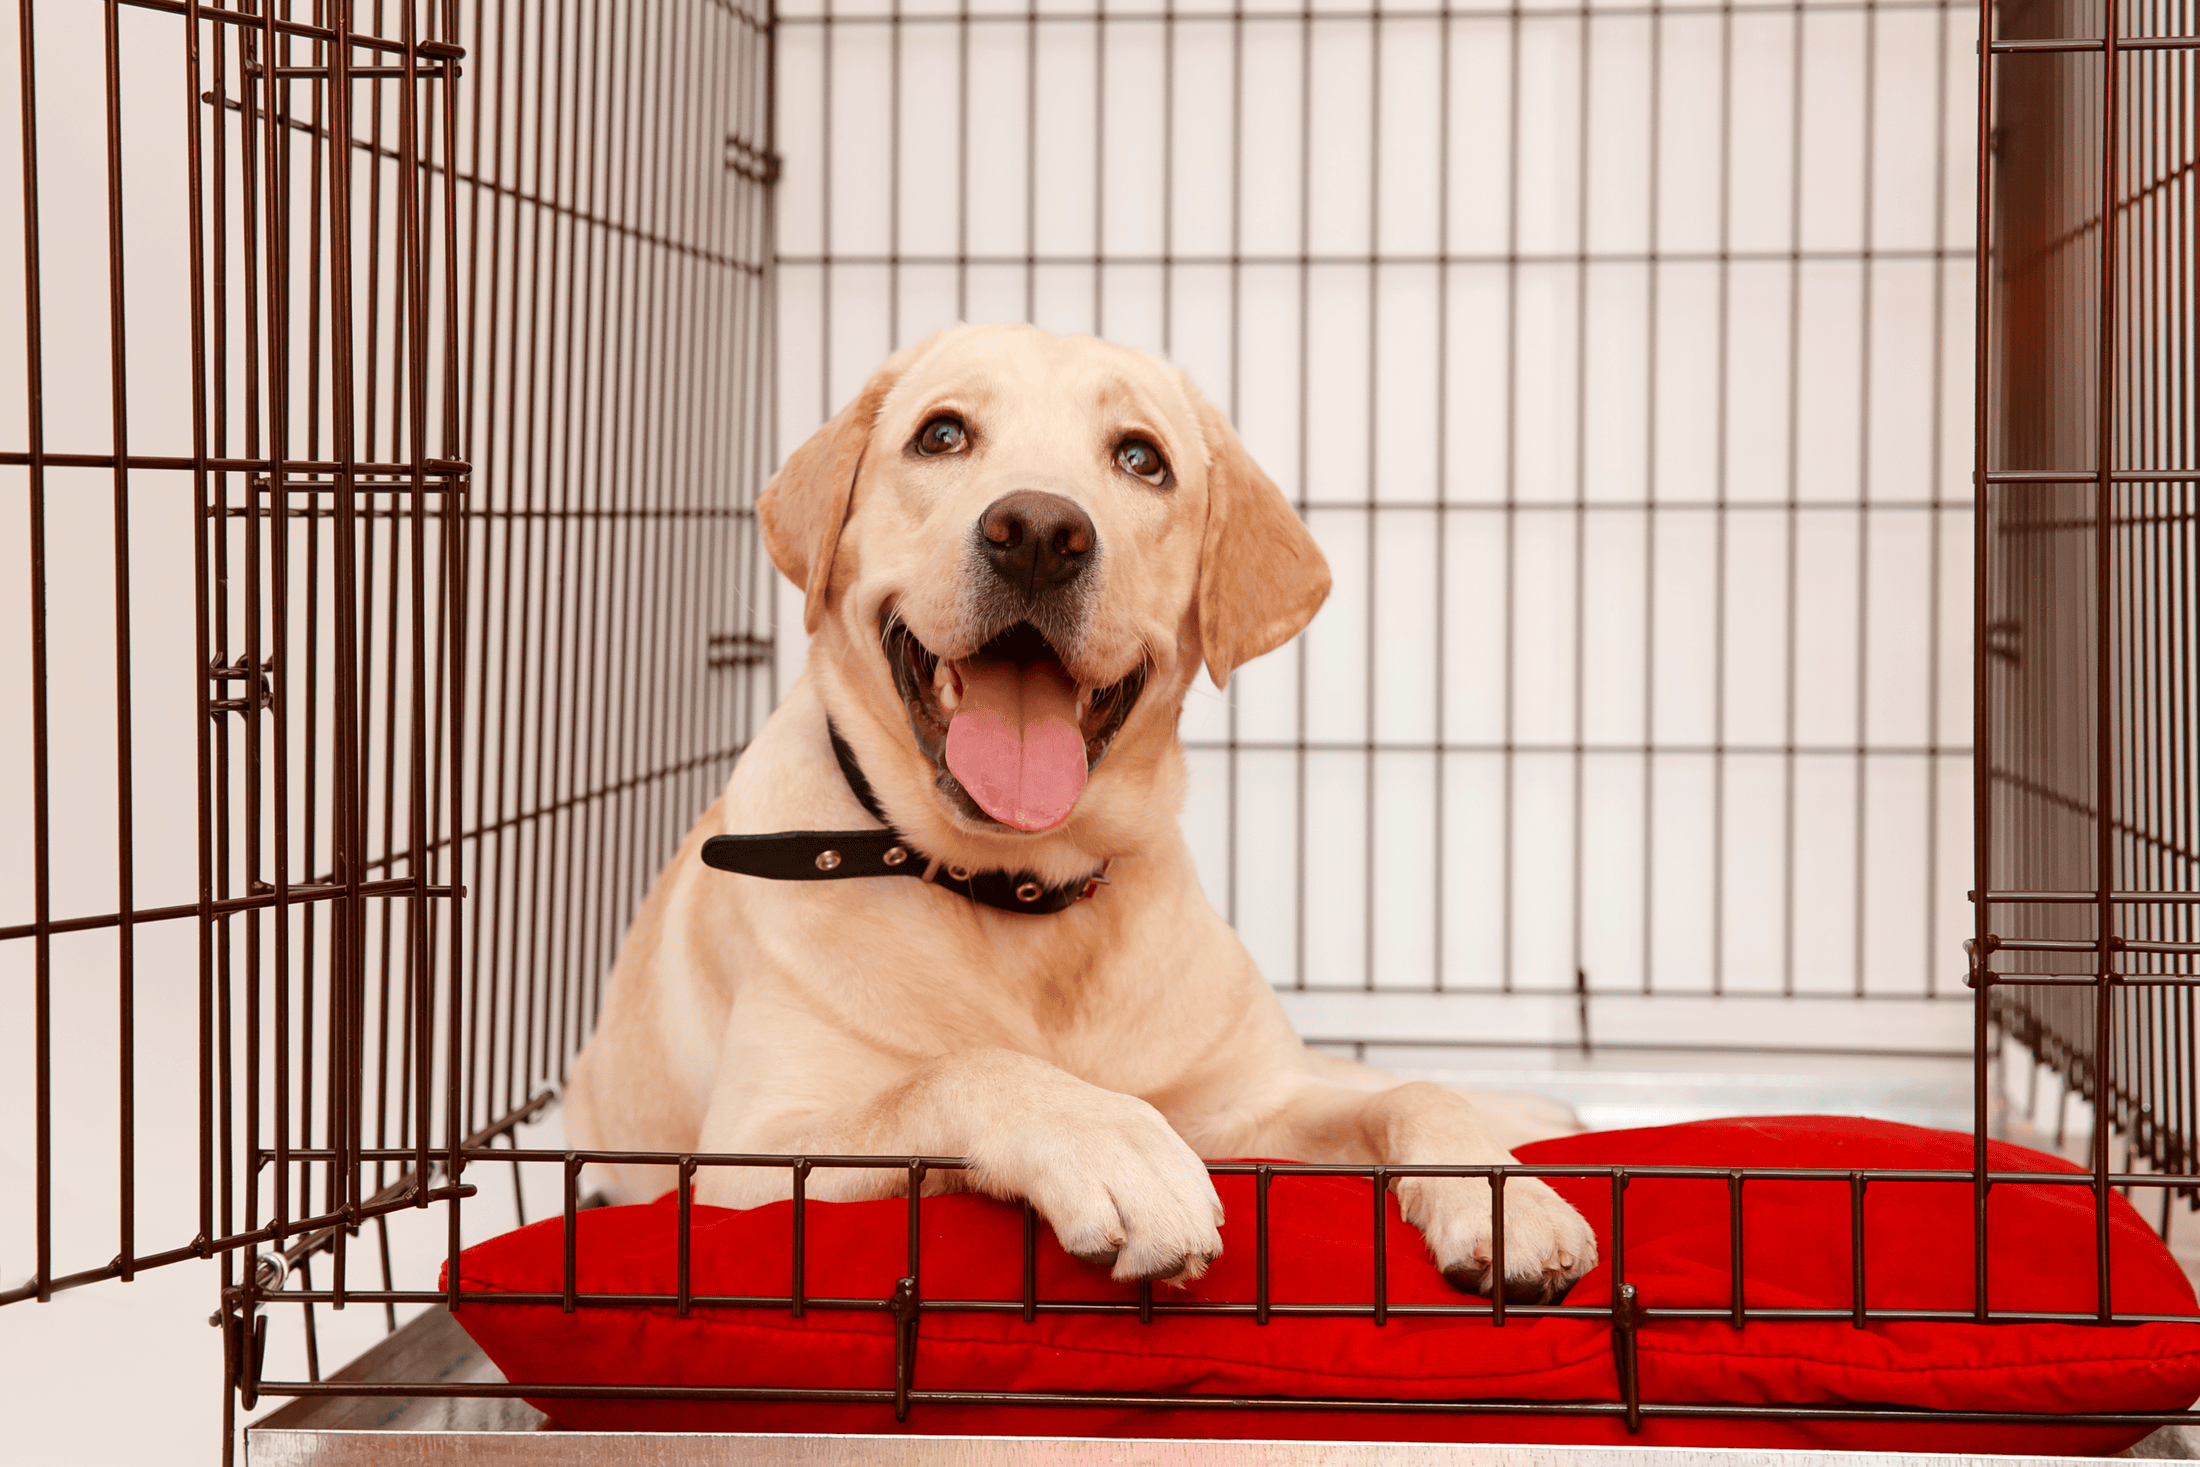 Crates can help your dog to stay home alone.